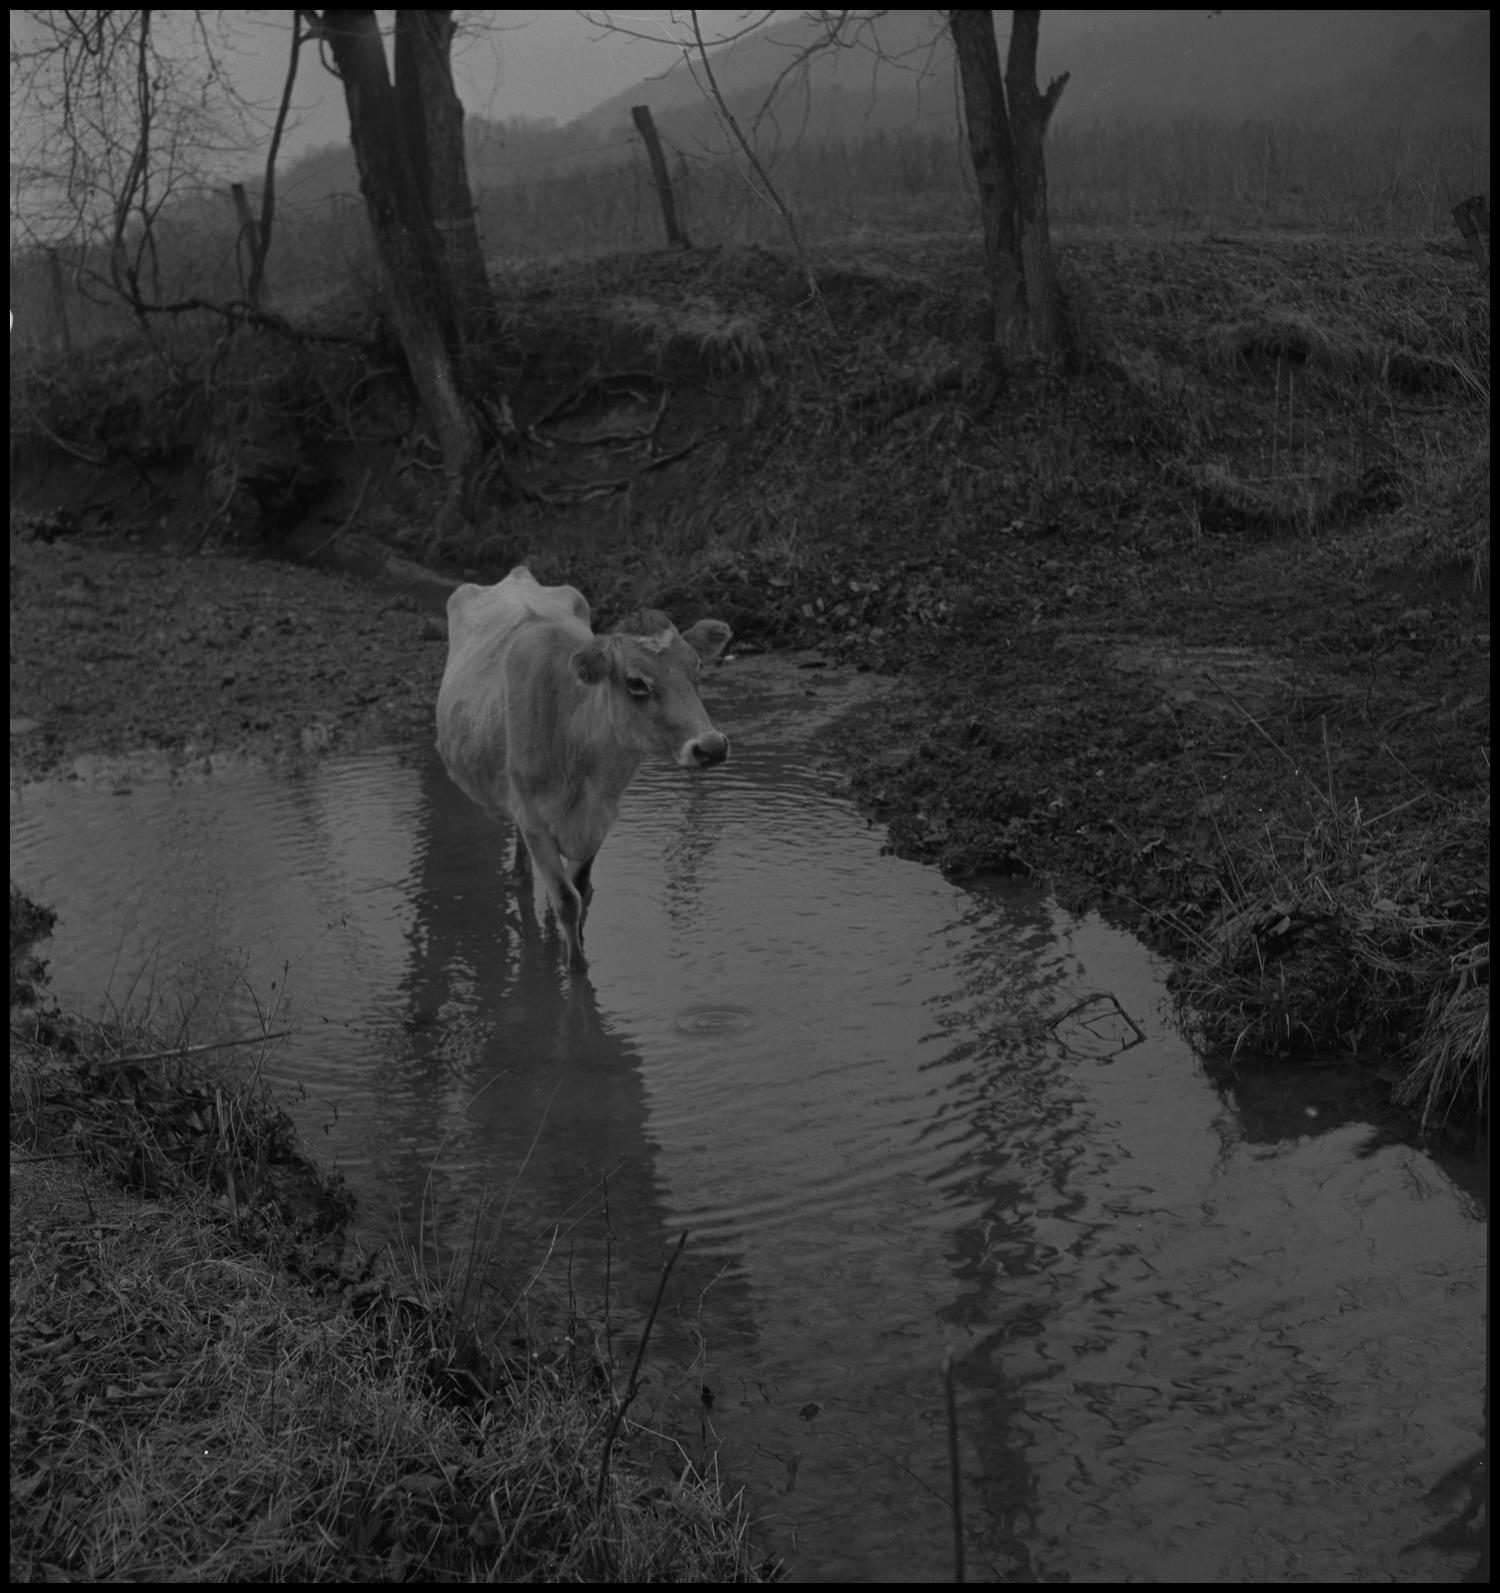 [Cow in water], Photograph of a cow standing in a small water hole. In the image, the water hole is from a dip in between trees and a wire fence can be seen behind them., 